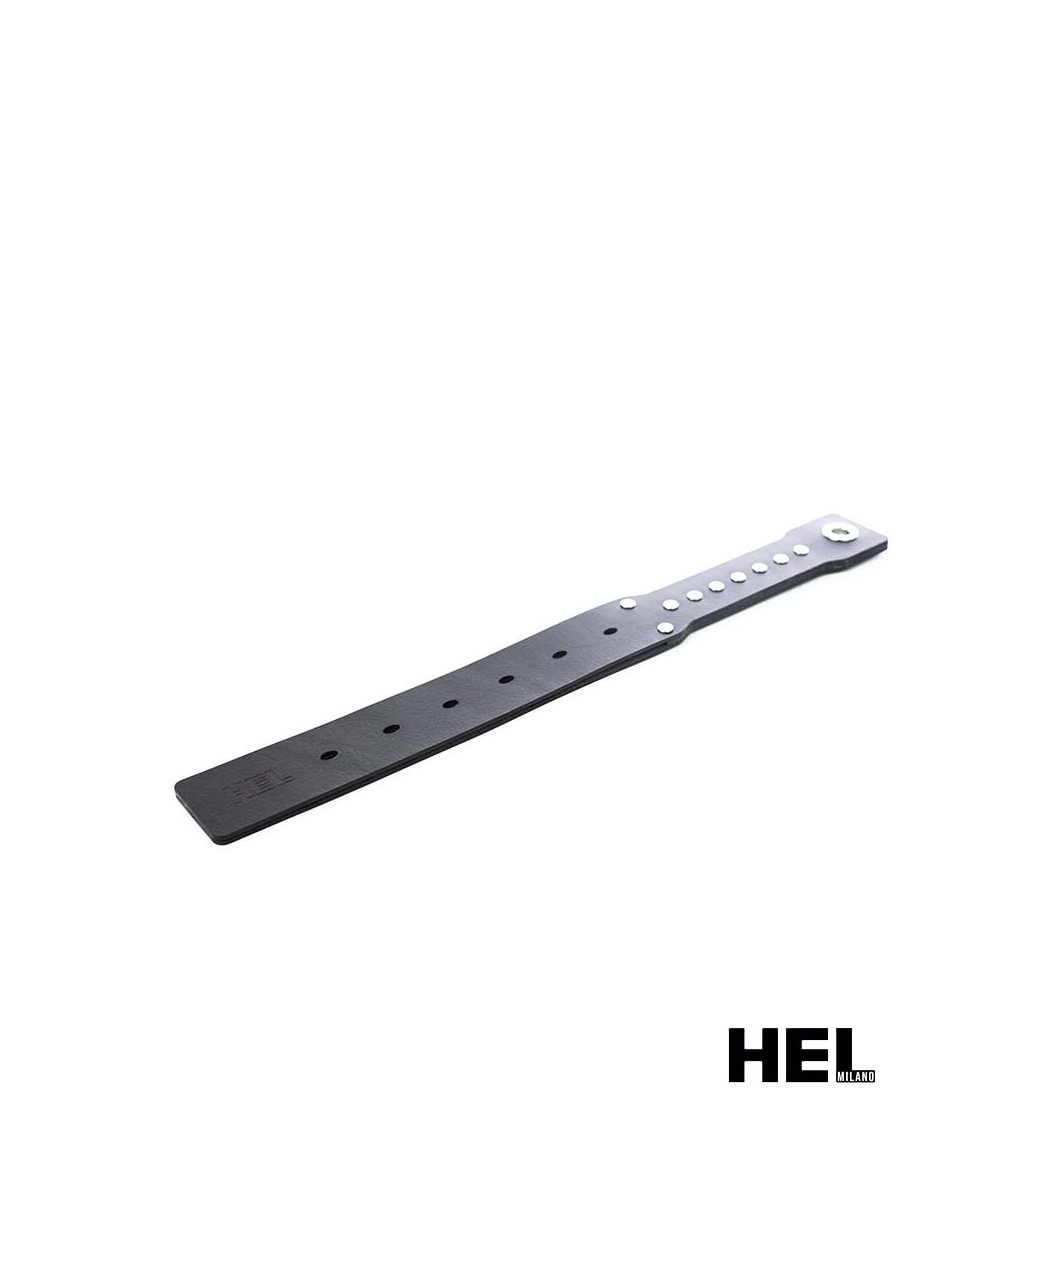 HEL Milano DLH by Flame Hel Leather Paddle